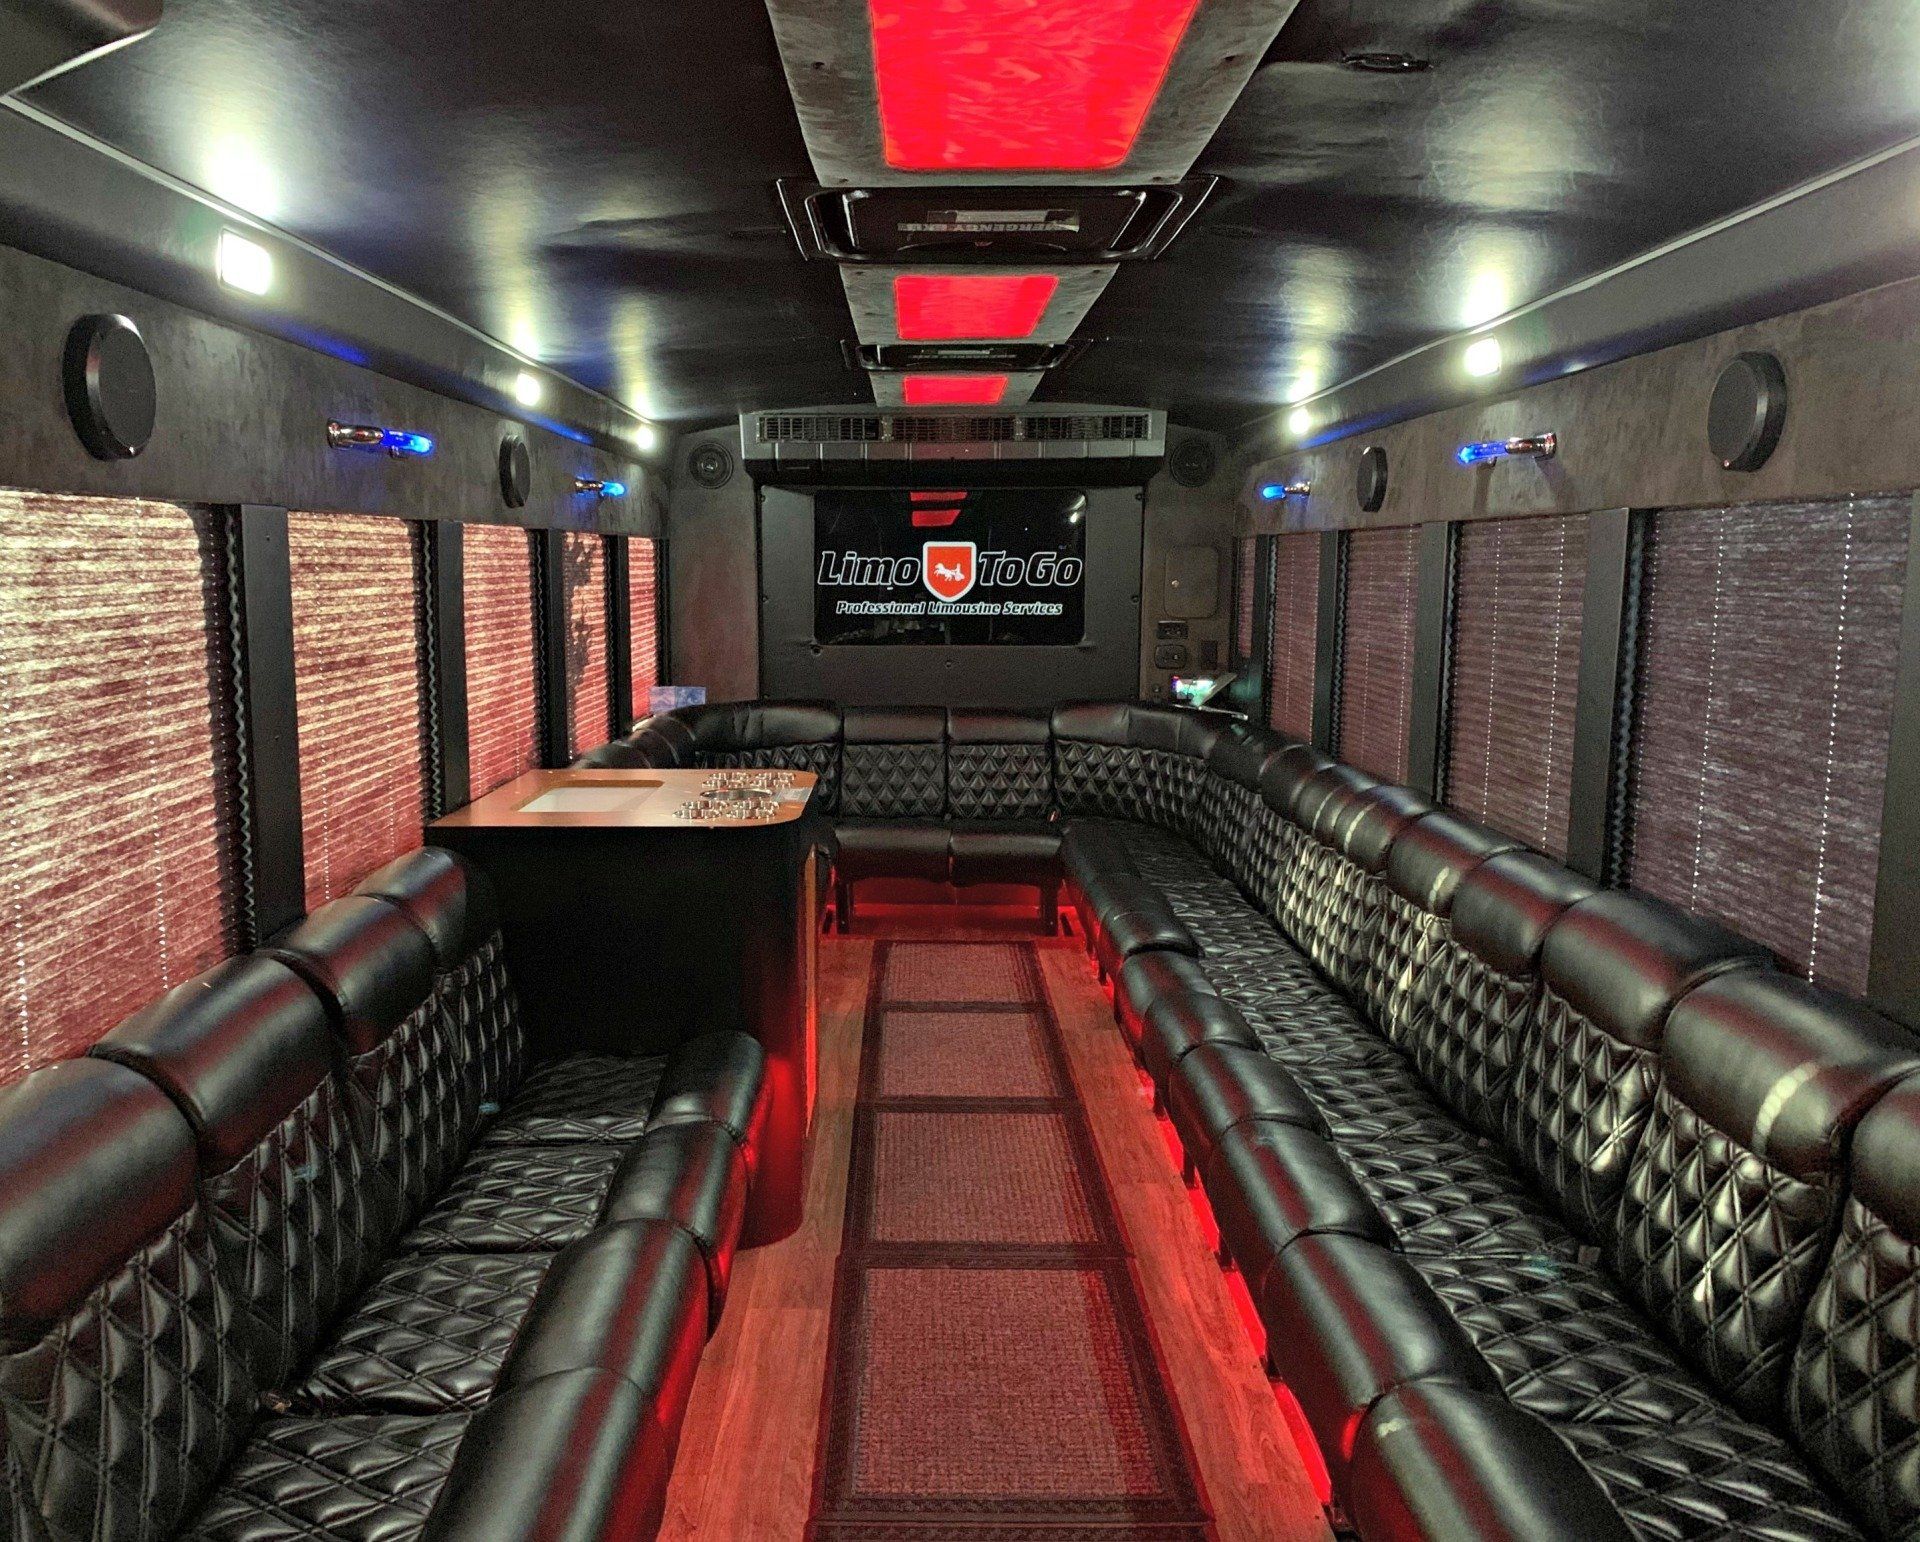 2014 International party bus red led lighting interior view with black Limo To Go logo on big screen tv